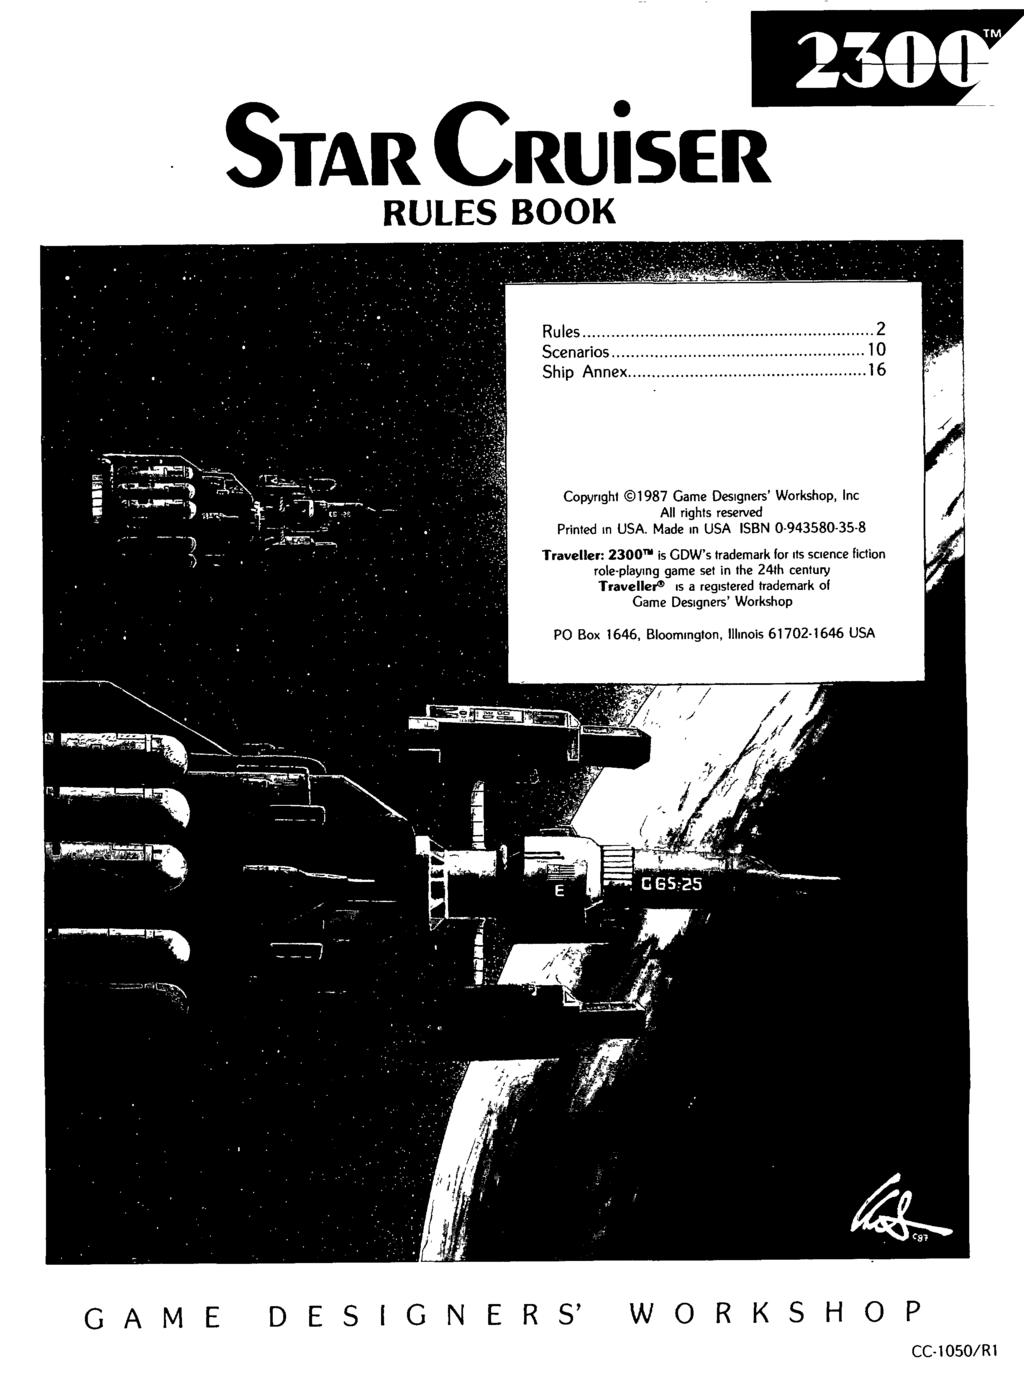 G STAR CRUiSER. RULES BOOK Rules... 2 Scenarios... 10 Ship Annex... 16 Copyright 01 987 Game Designers Workshop, Inc All rights reserved Printed in USA.